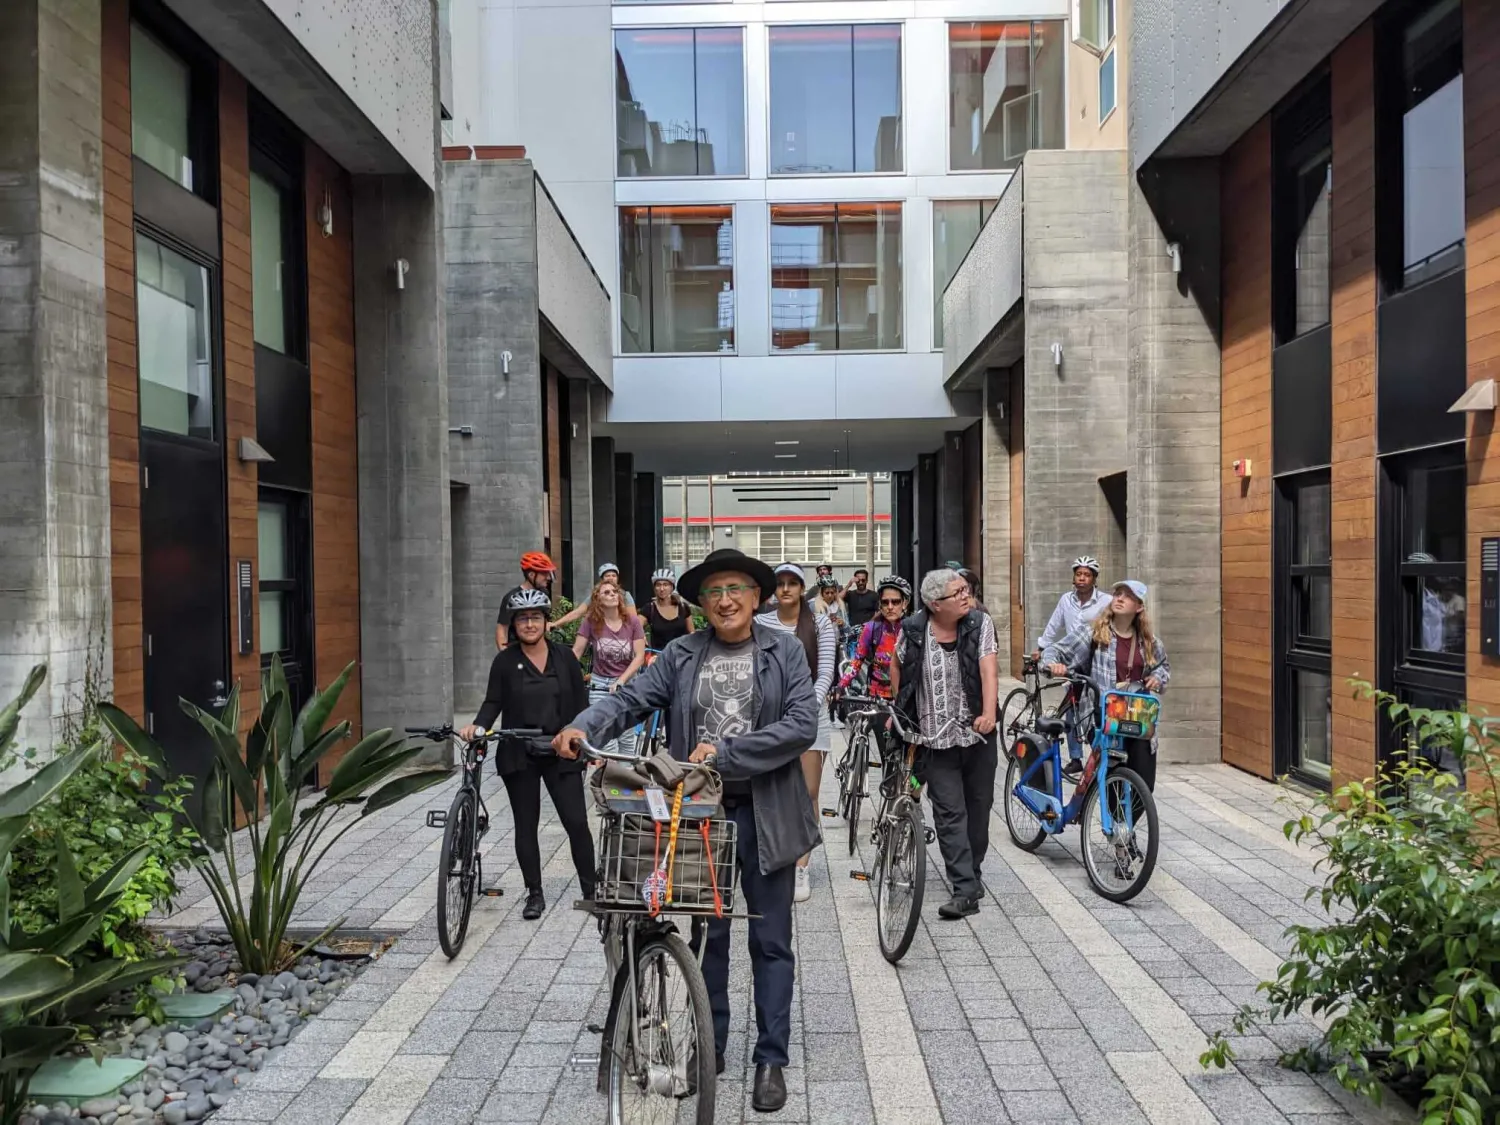 David Baker and other people walking through the Five88 Courtyard with their bikes in San Francisco.